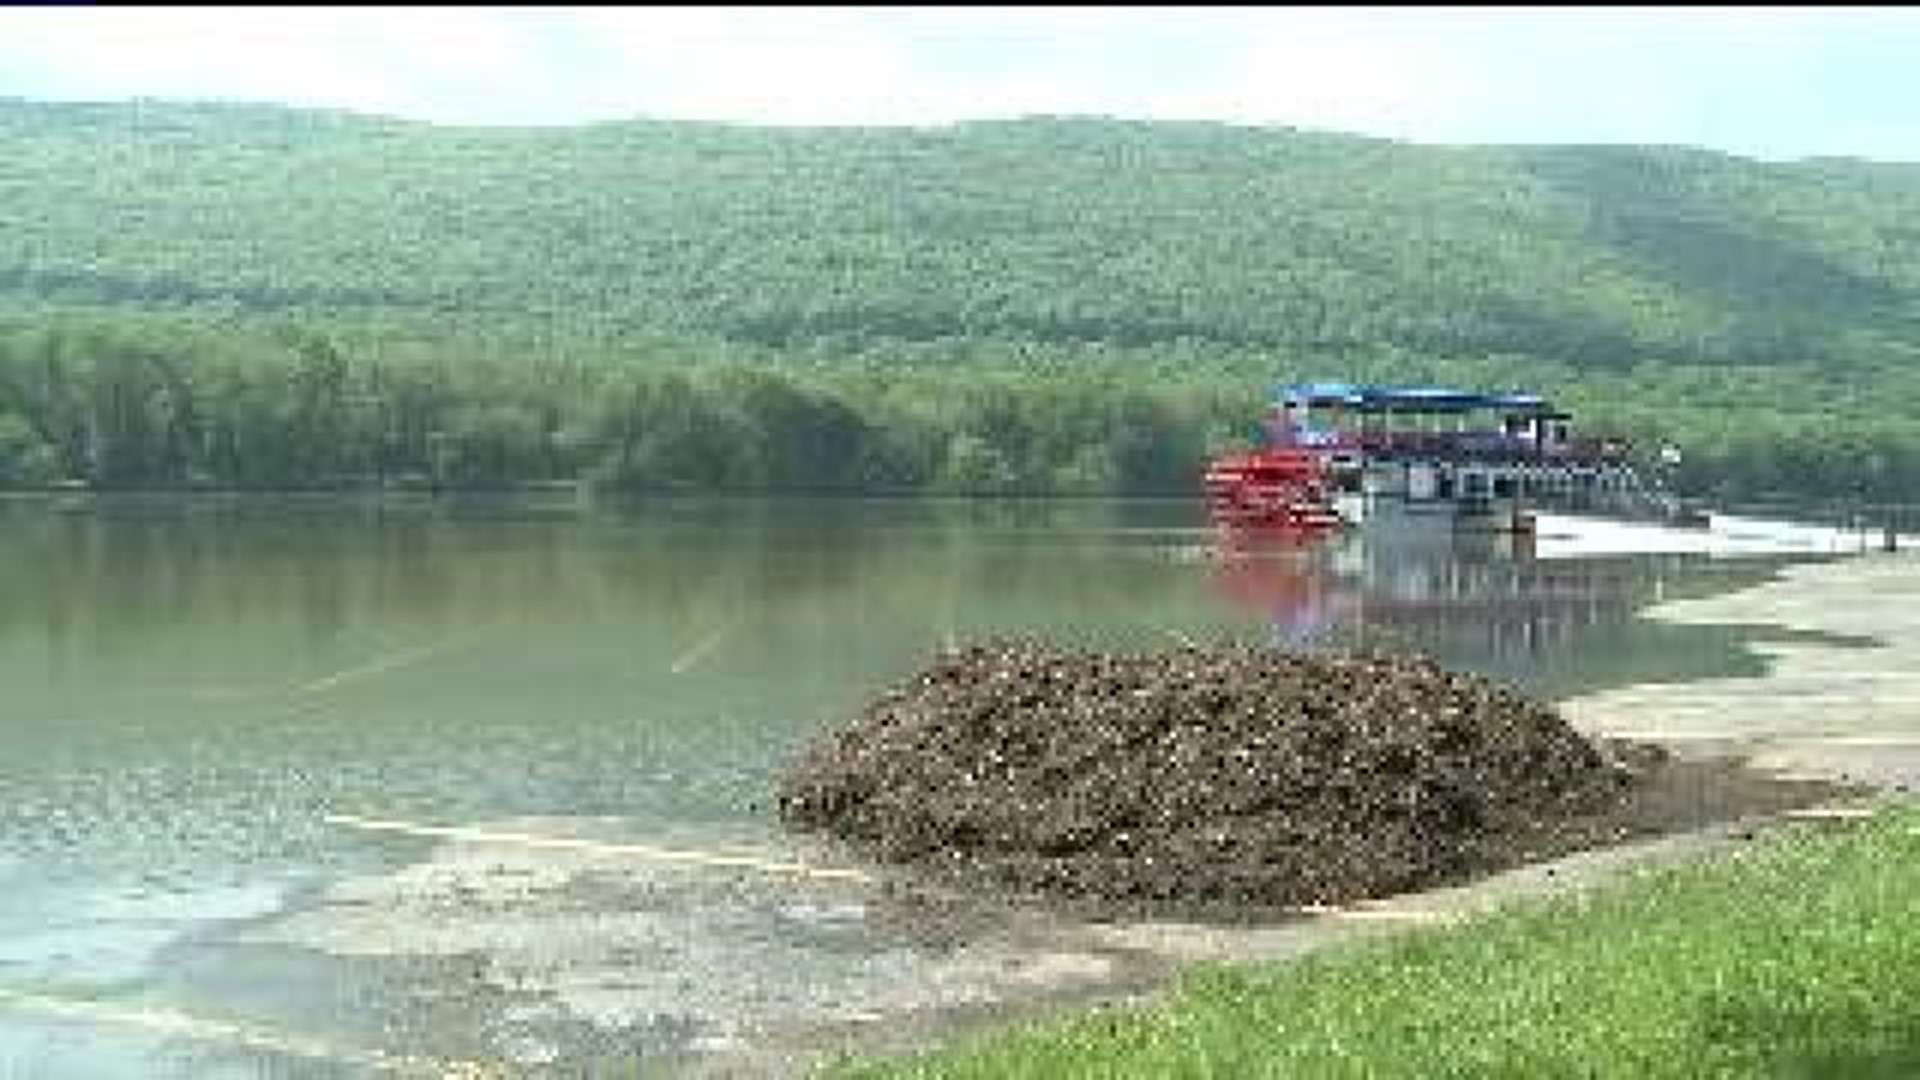 Hiawatha Boat Tours Cancelled for Saturday